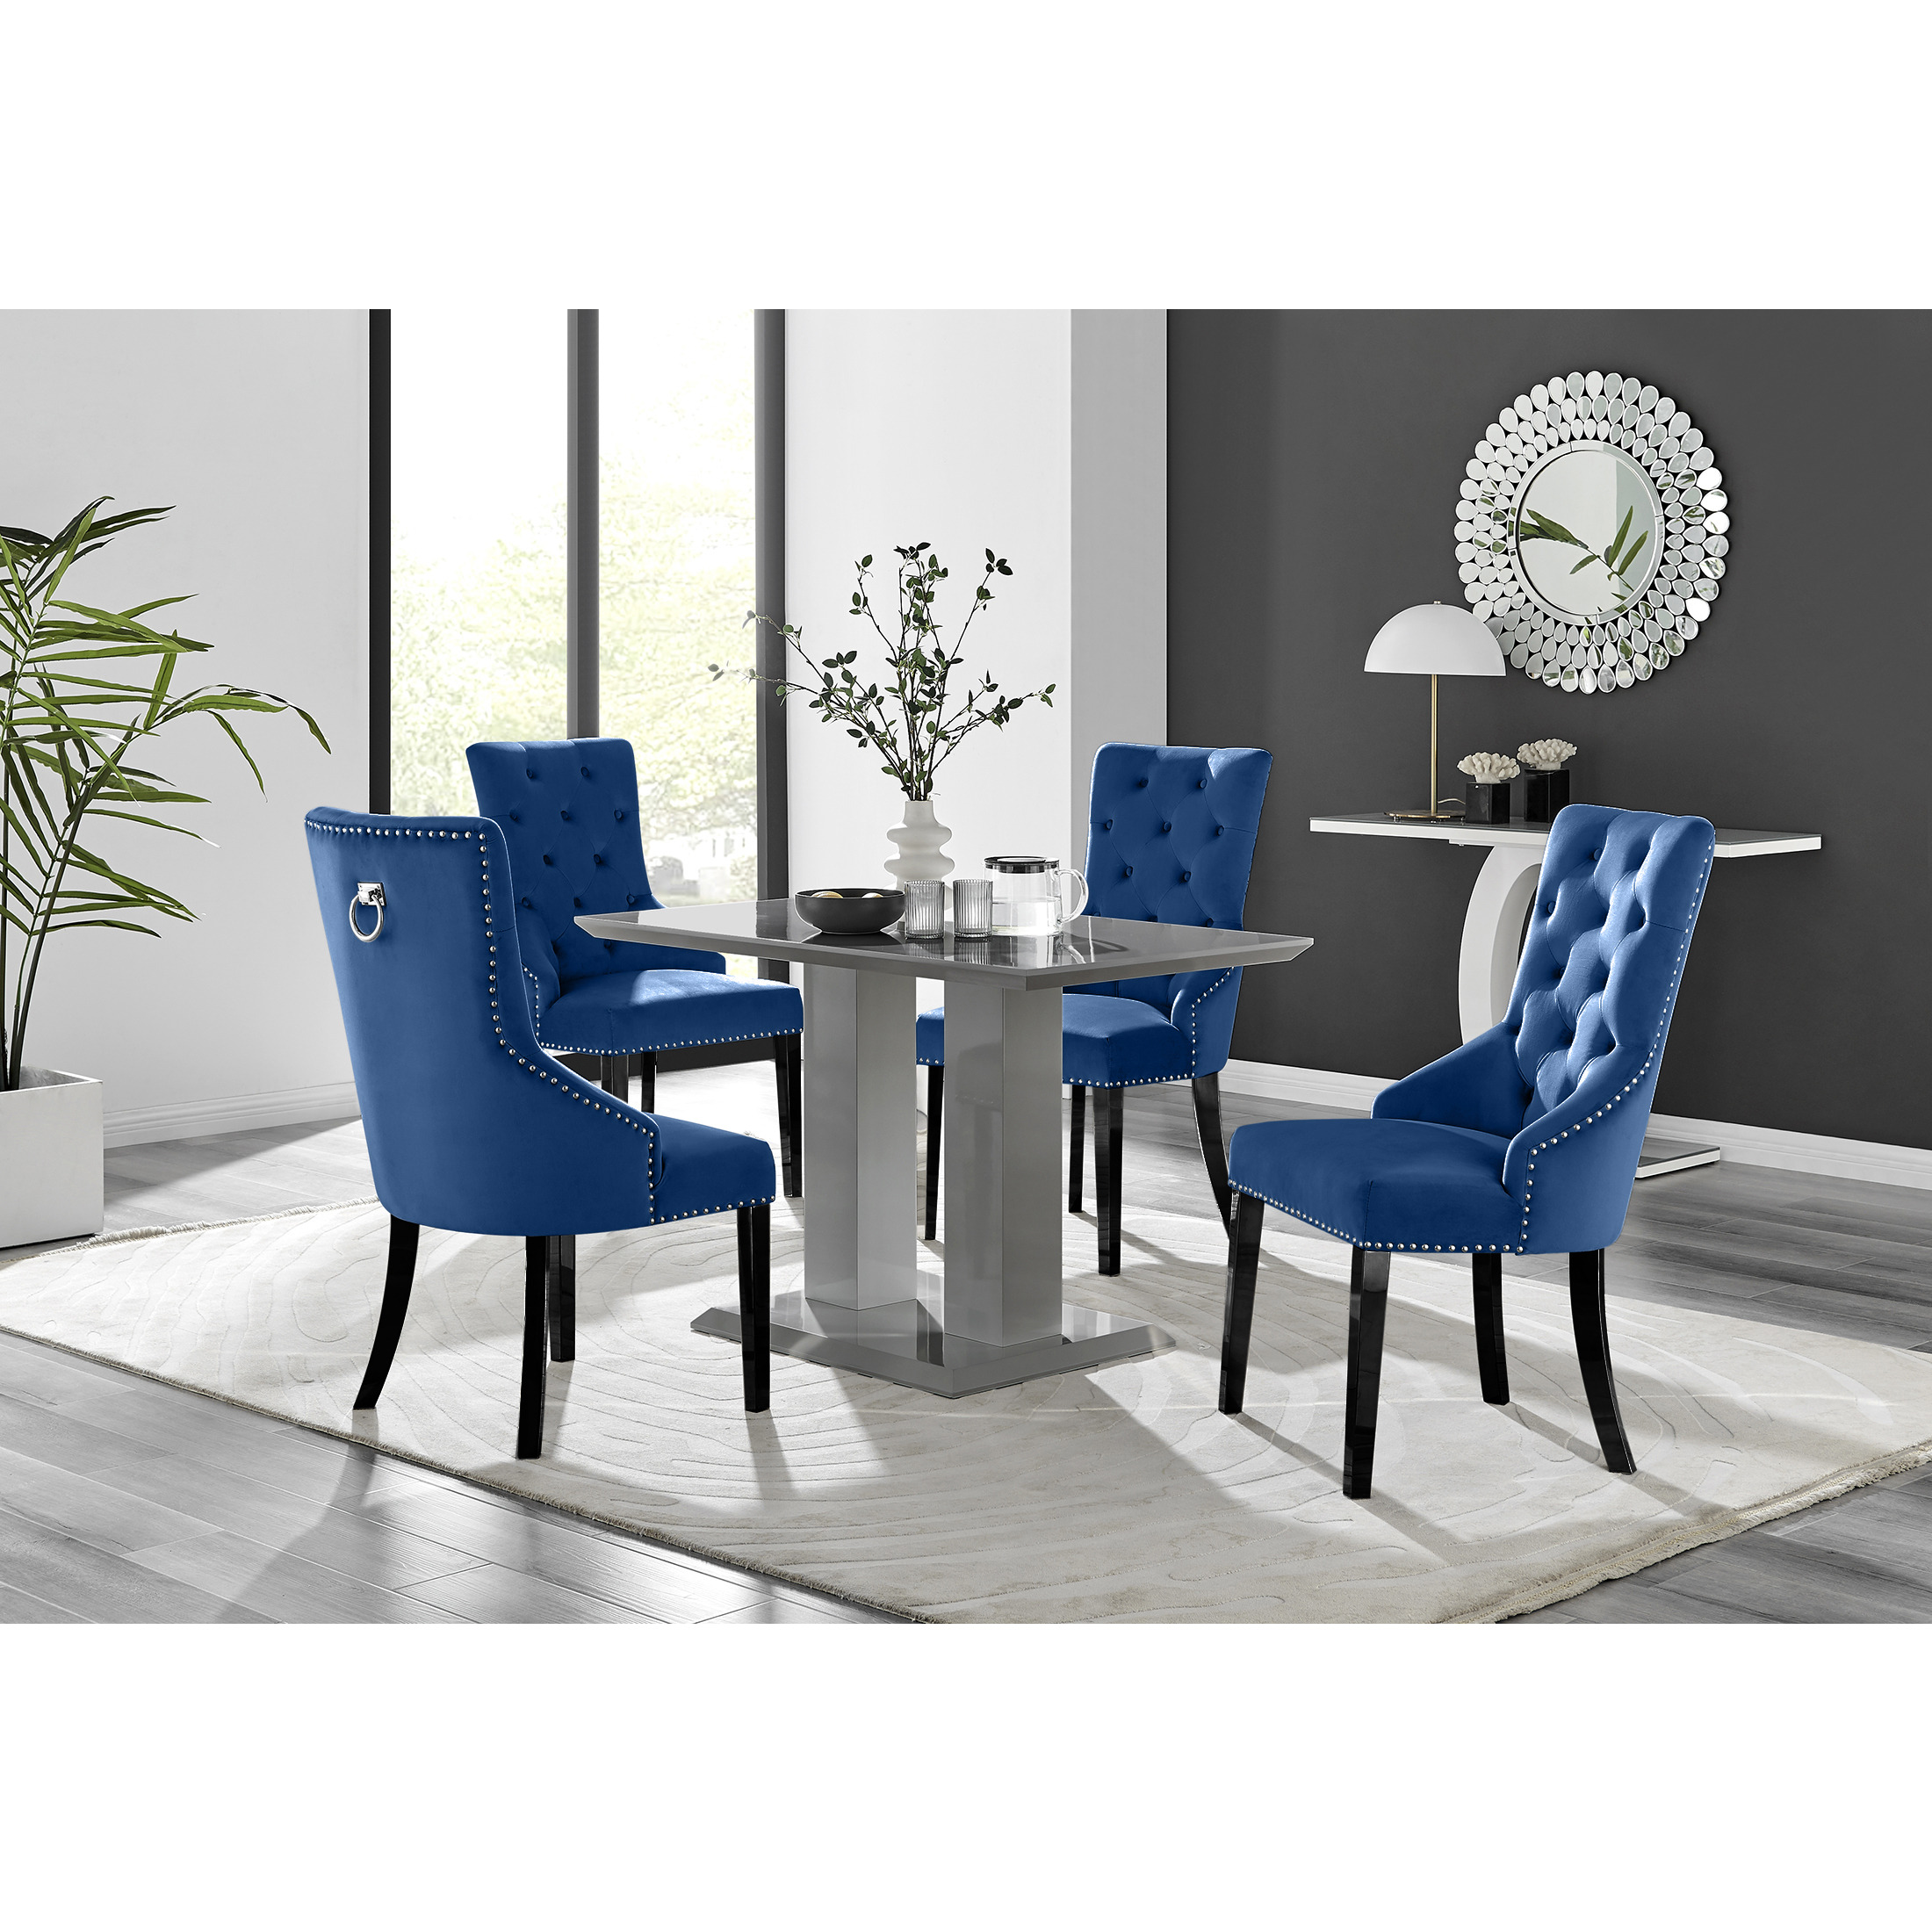 Imperia 4 Grey Dining Table and 4 Belgravia Black Leg Chairs